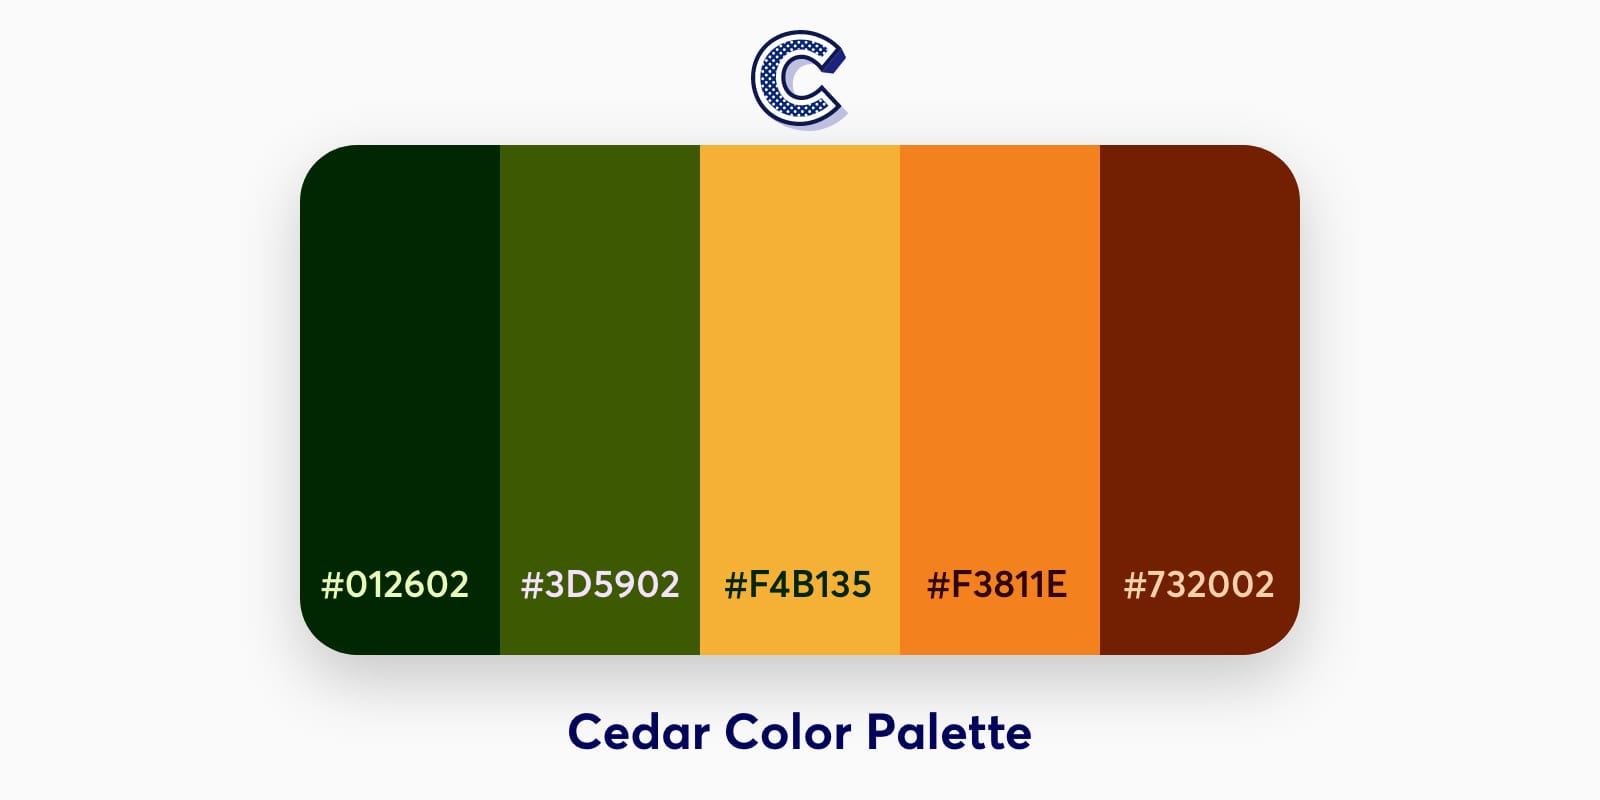 the featured image of cedar color palette